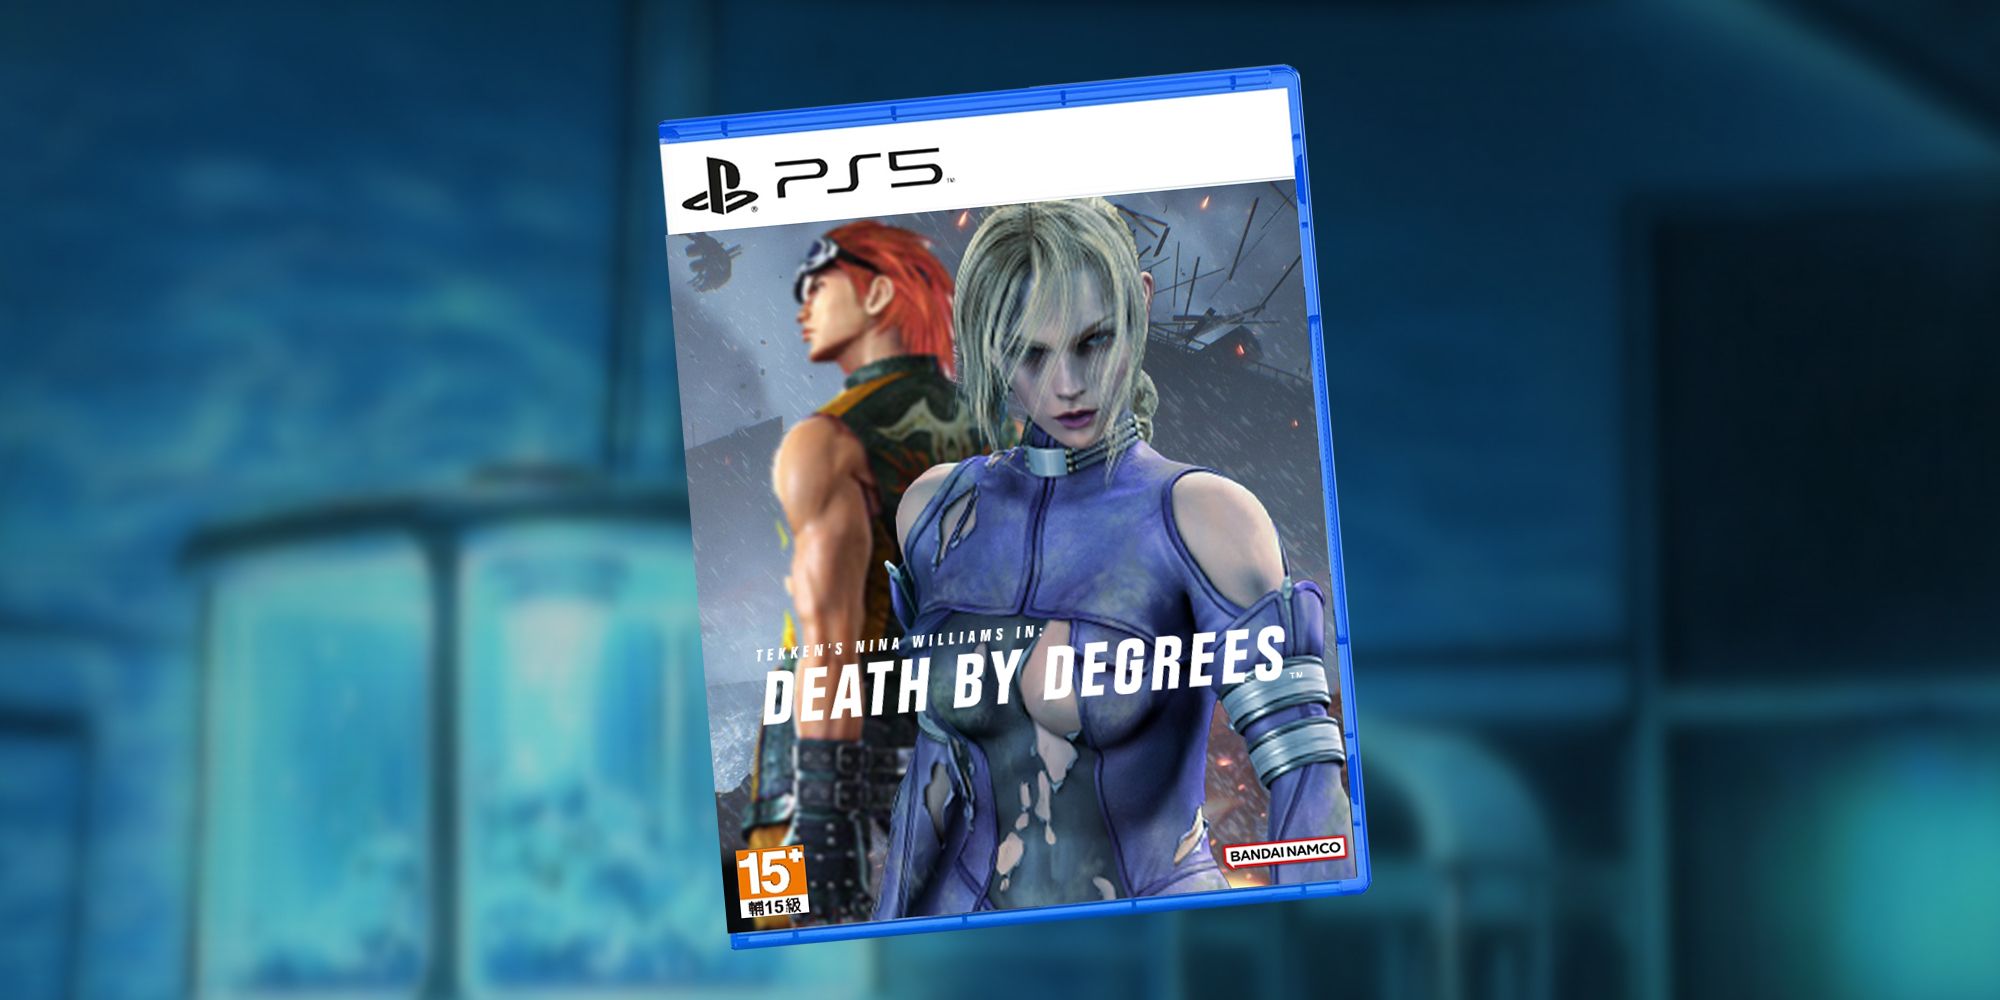 Death by Degrees cover with Hwoarang mocked up for PS5